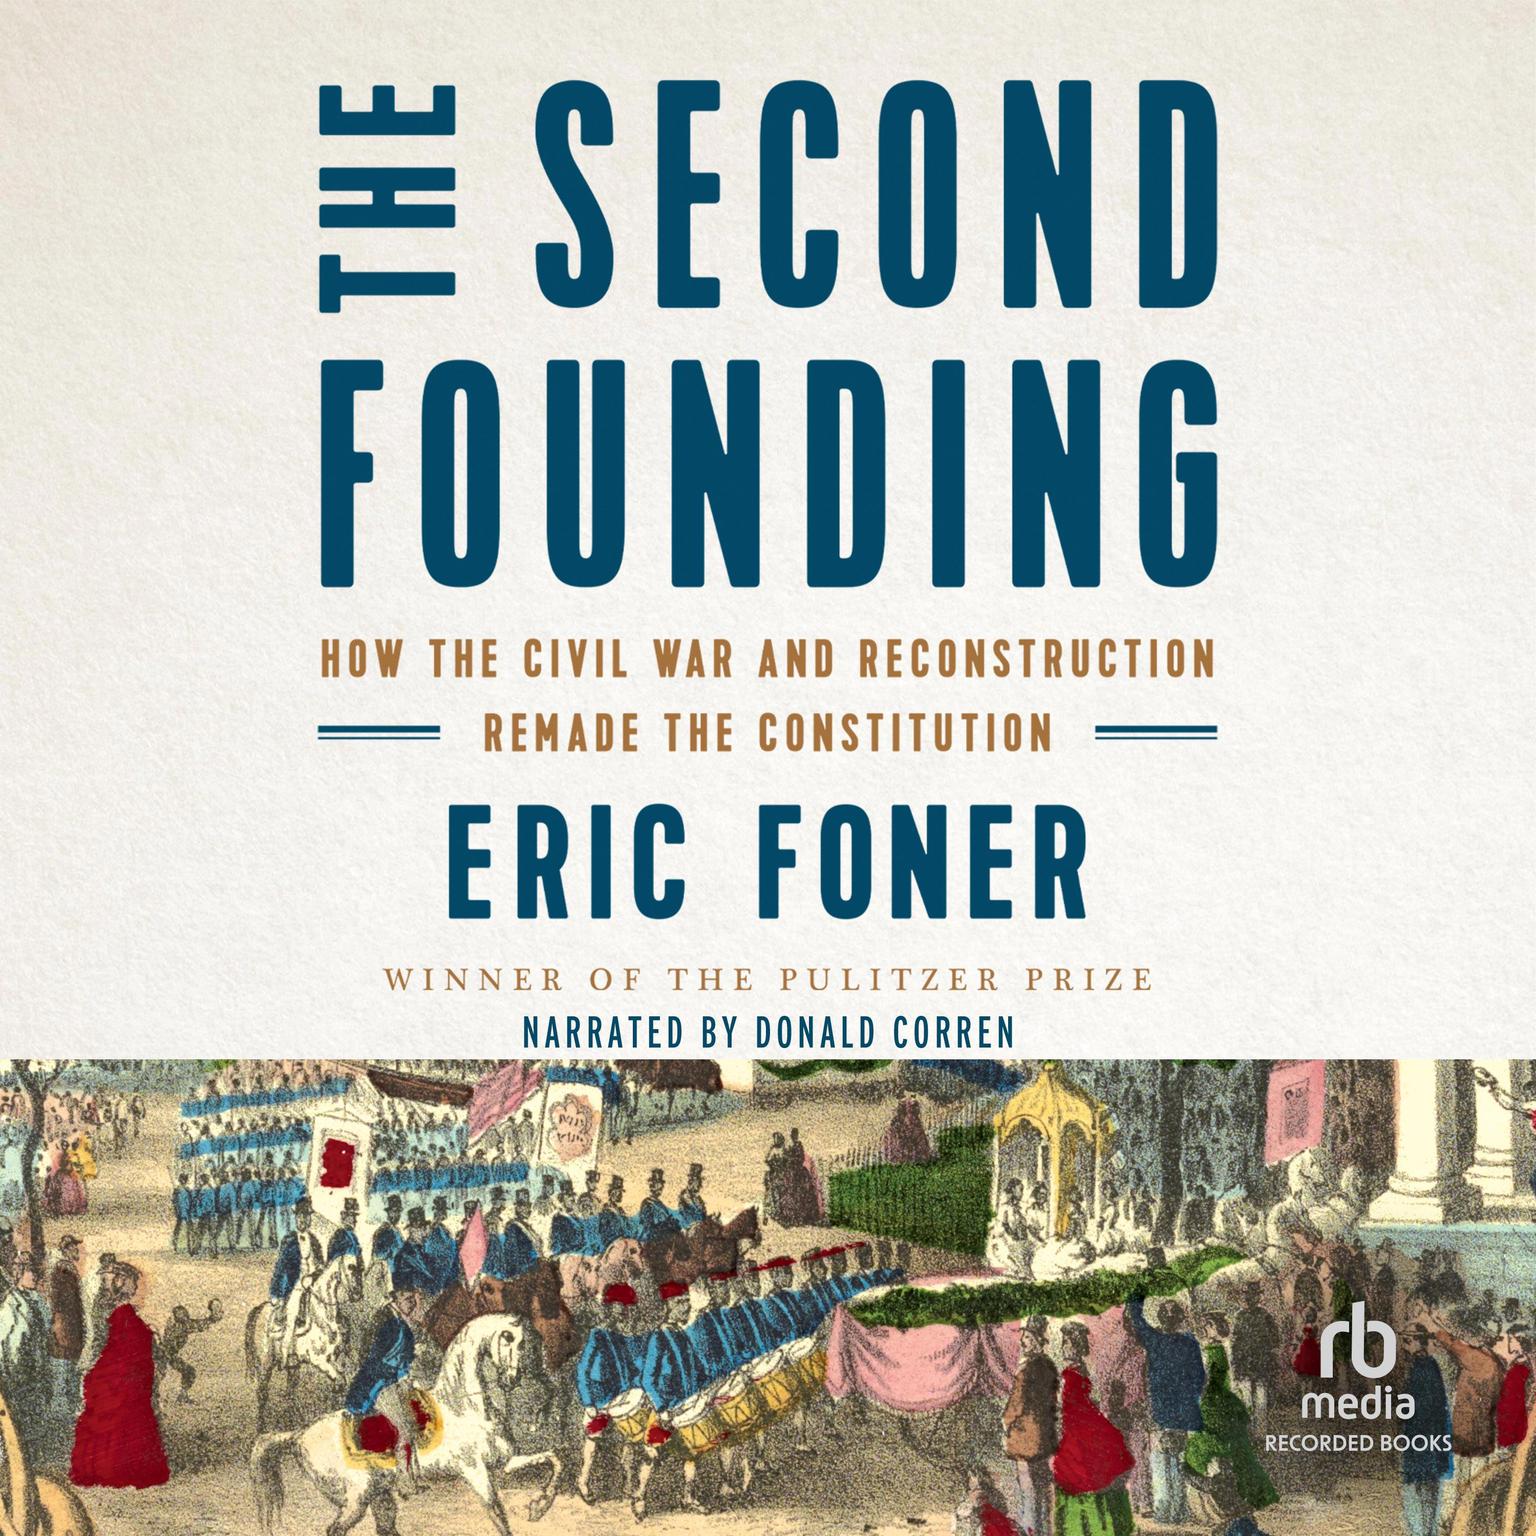 The Second Founding: How the Civil War and Reconstruction Remade the Constitution Audiobook, by Eric Foner